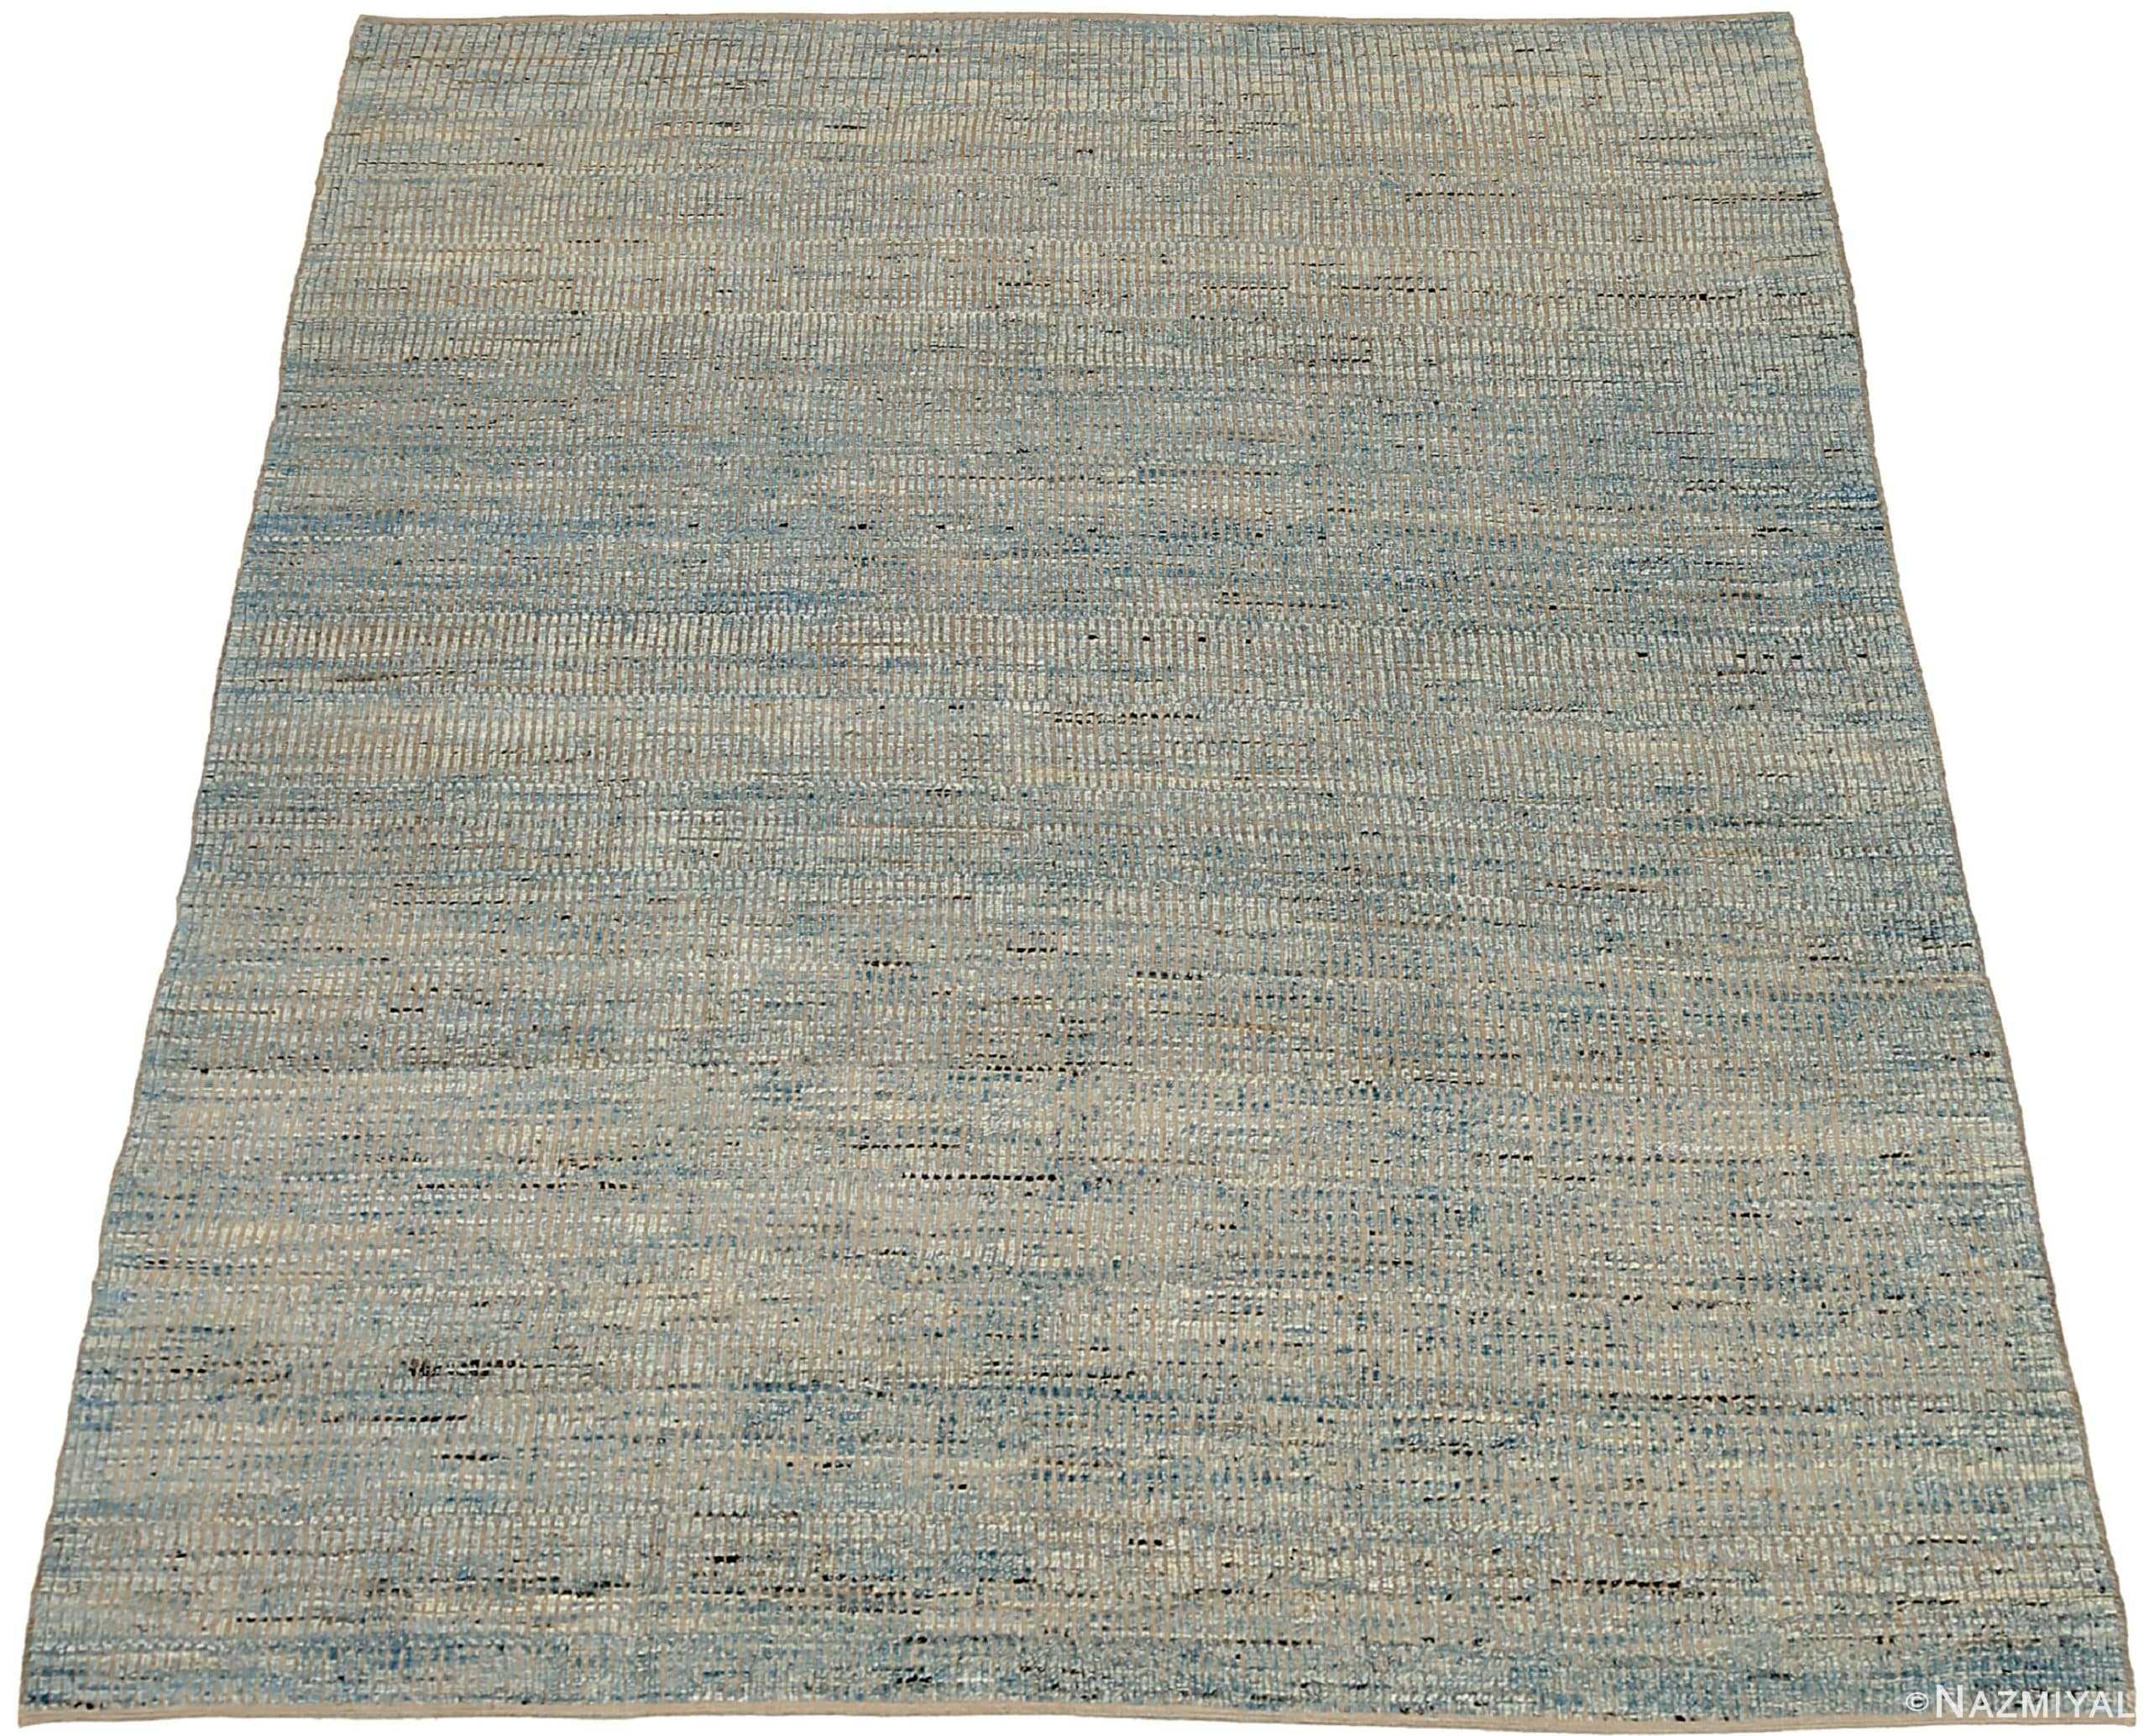 Whole View Of Grey Blue Textured Modern Distressed Rug 60828 by Nazmiyal Antique Rugs